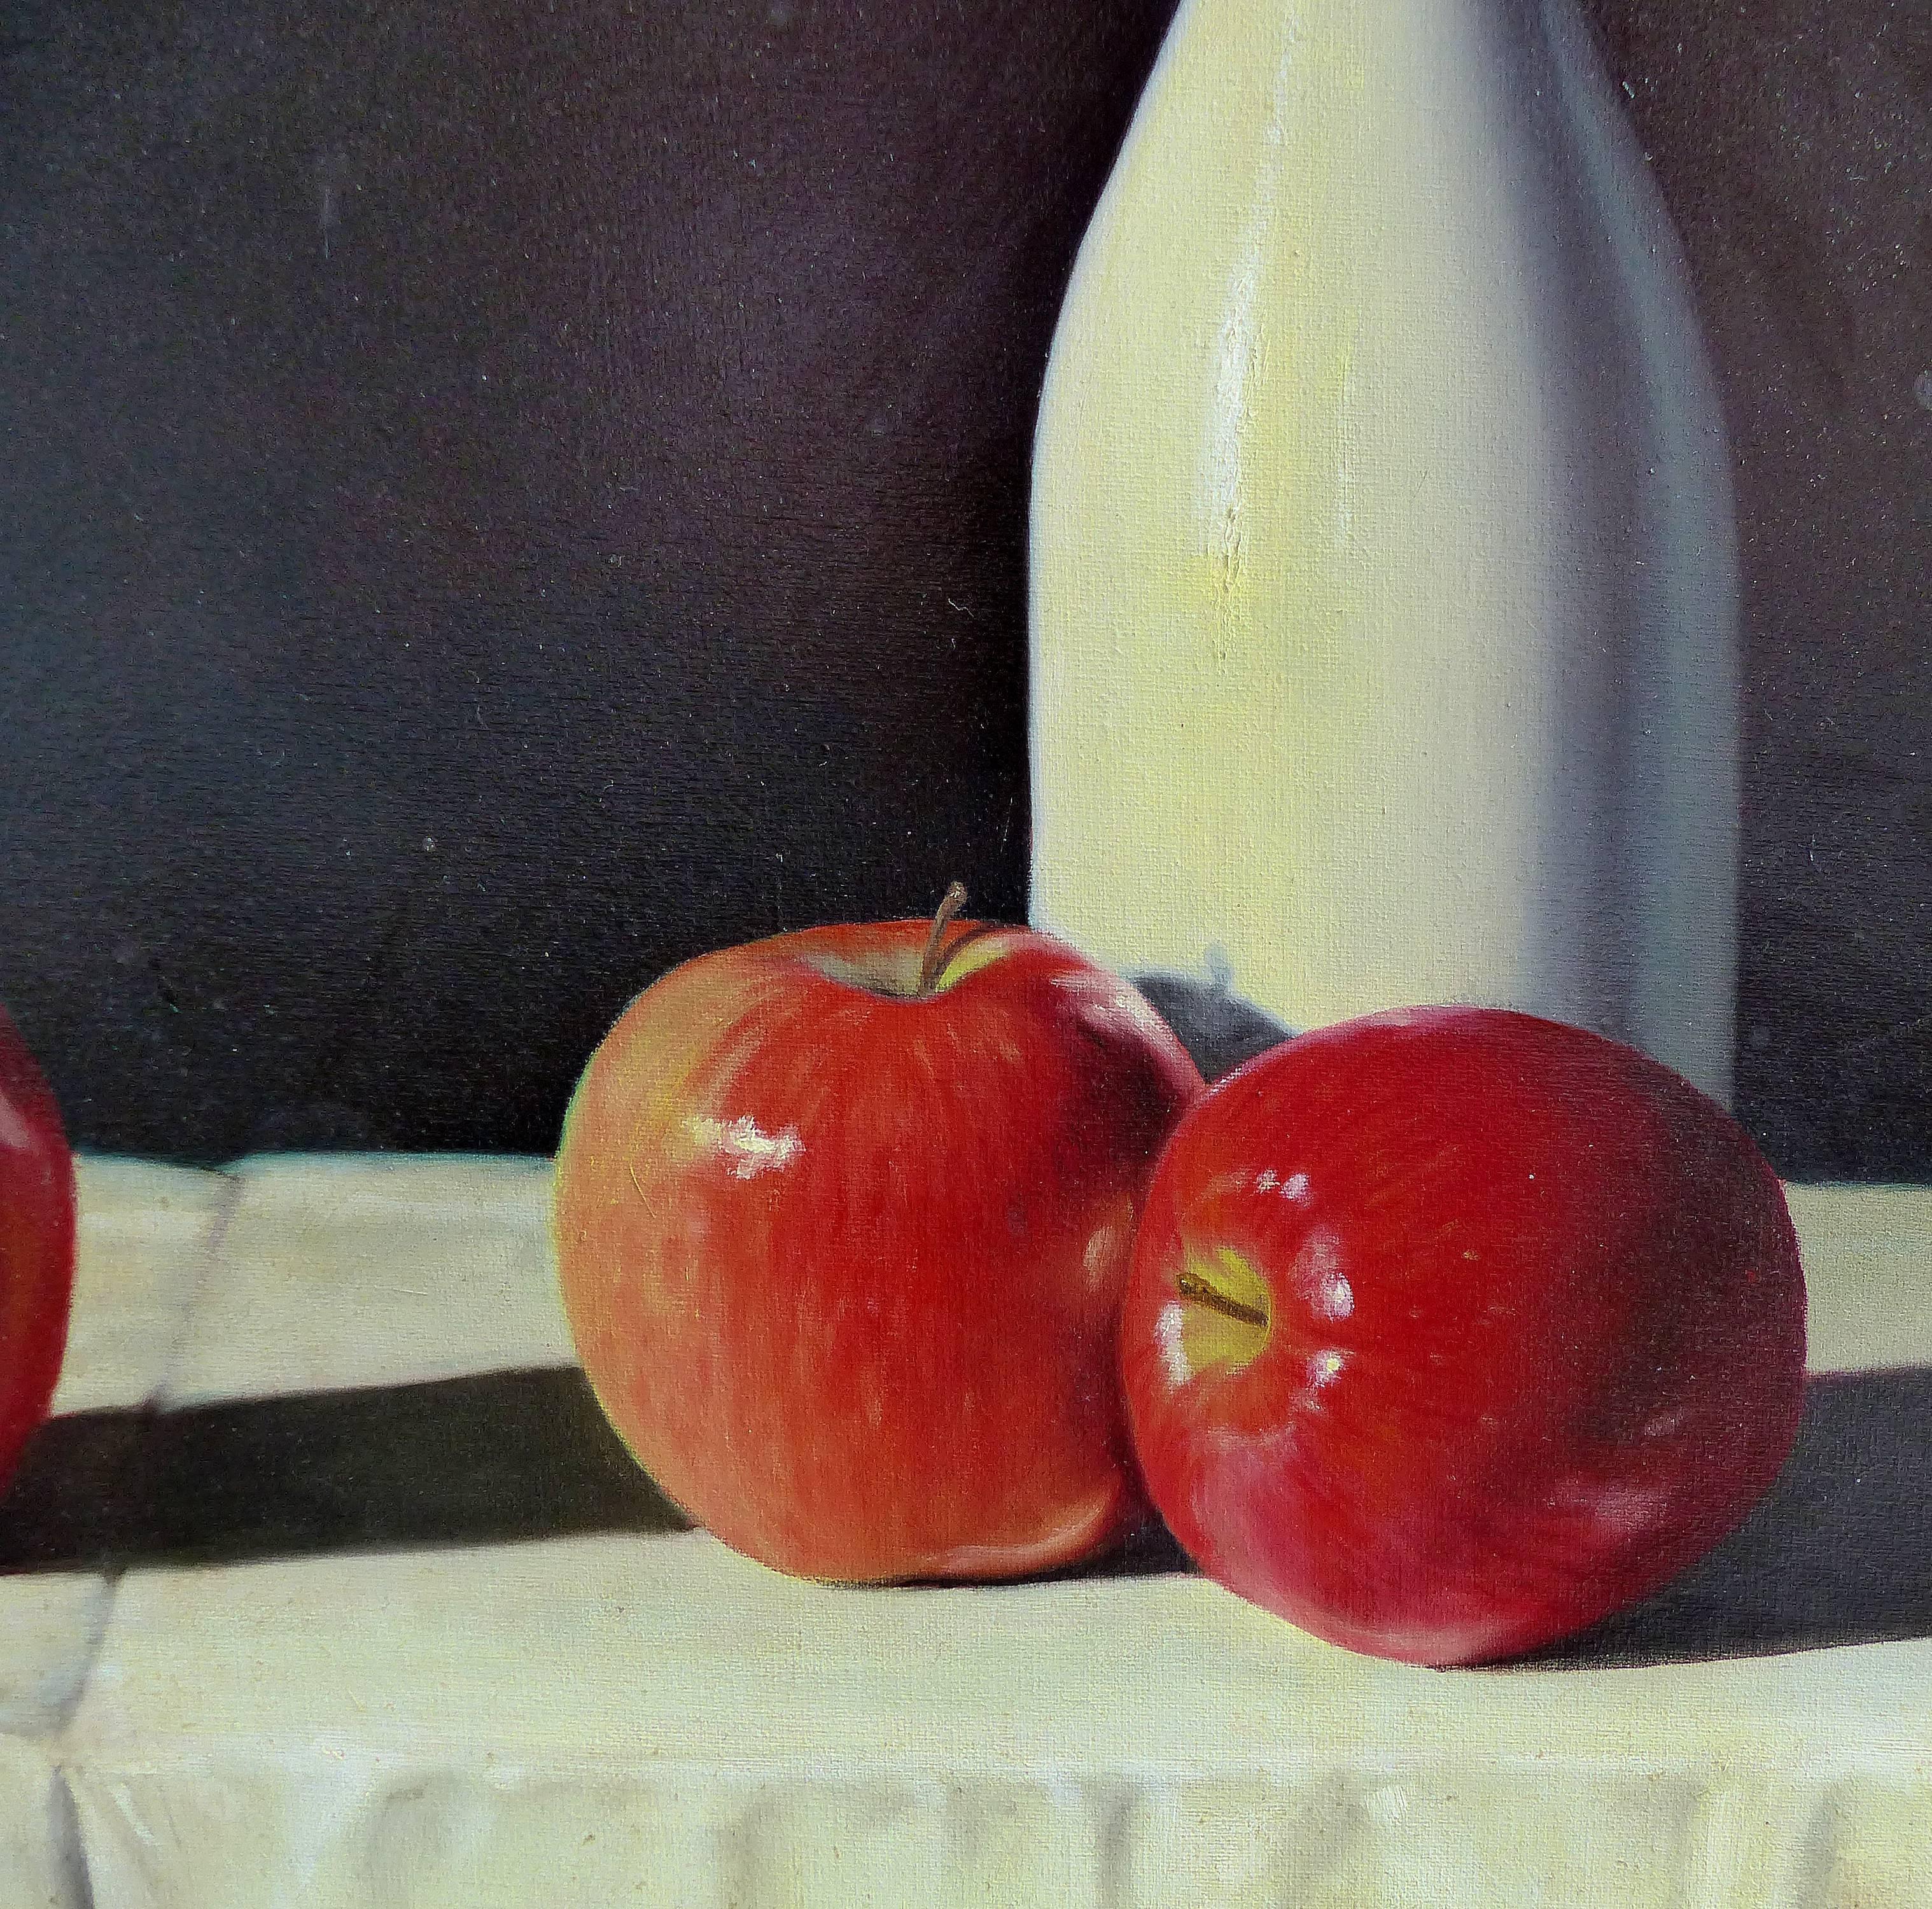 Contemporary Realism Still Life Oil on Canvas with Apples by G. B. Valverde 3